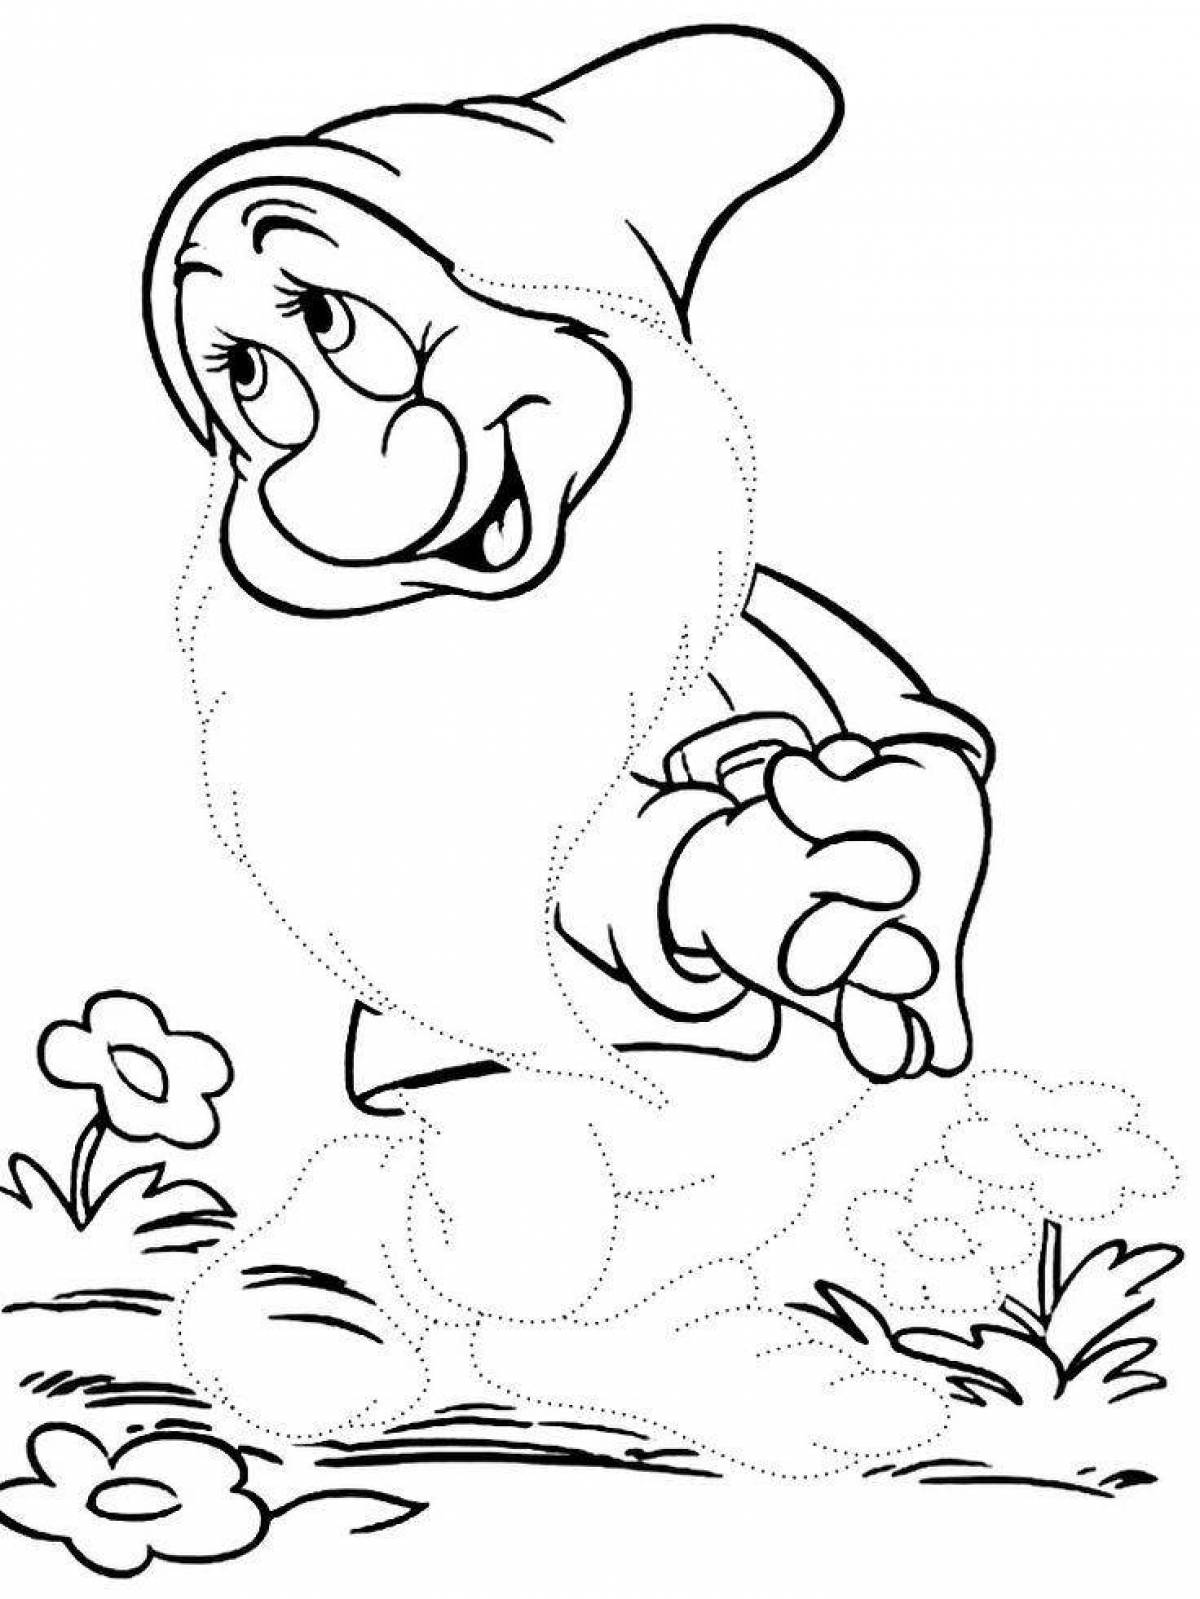 Fun dwarf coloring pages